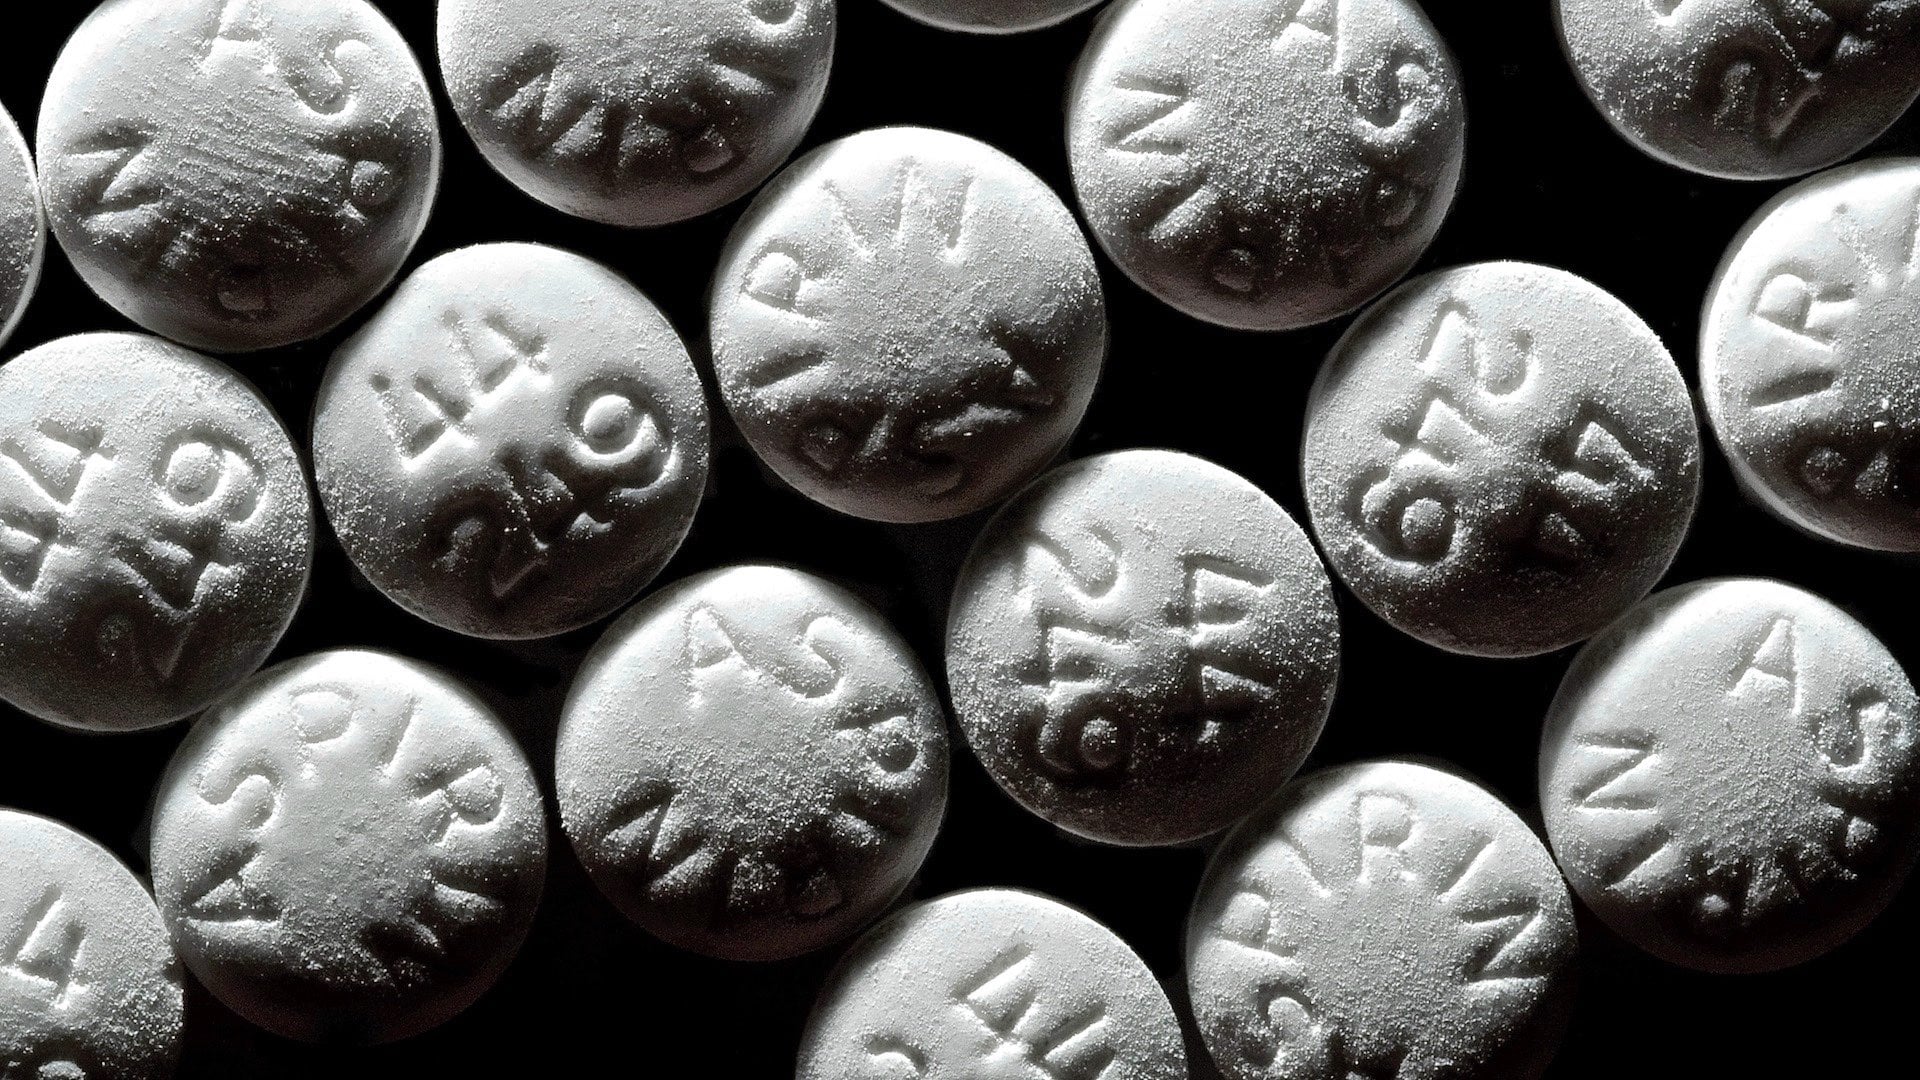 Should We All Take Aspirin to Prevent Cancer?